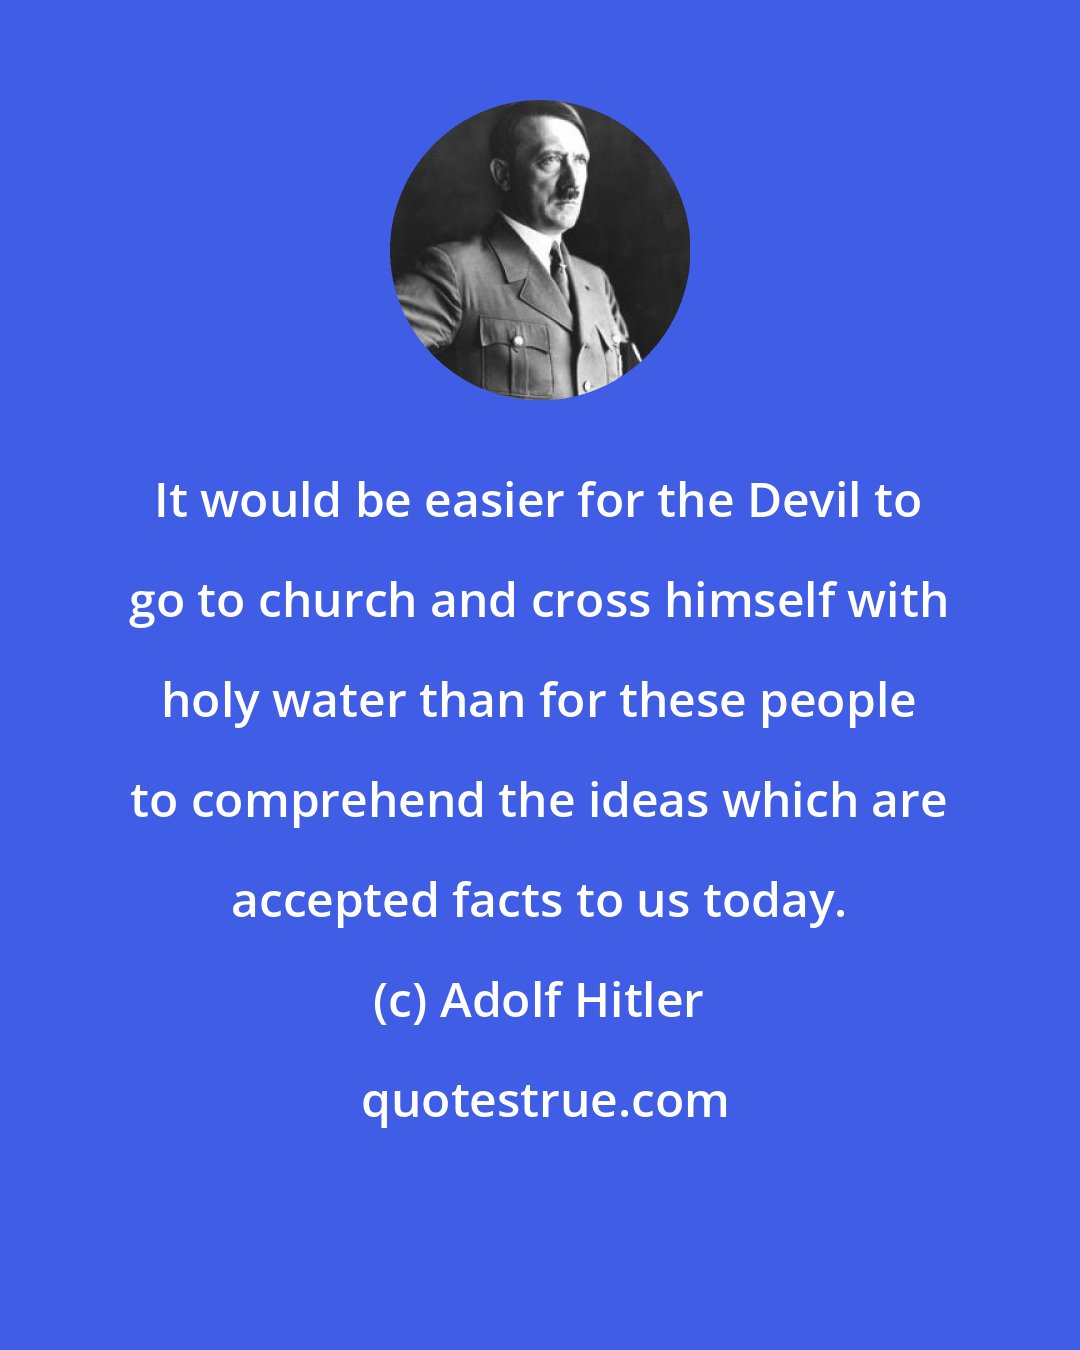 Adolf Hitler: It would be easier for the Devil to go to church and cross himself with holy water than for these people to comprehend the ideas which are accepted facts to us today.